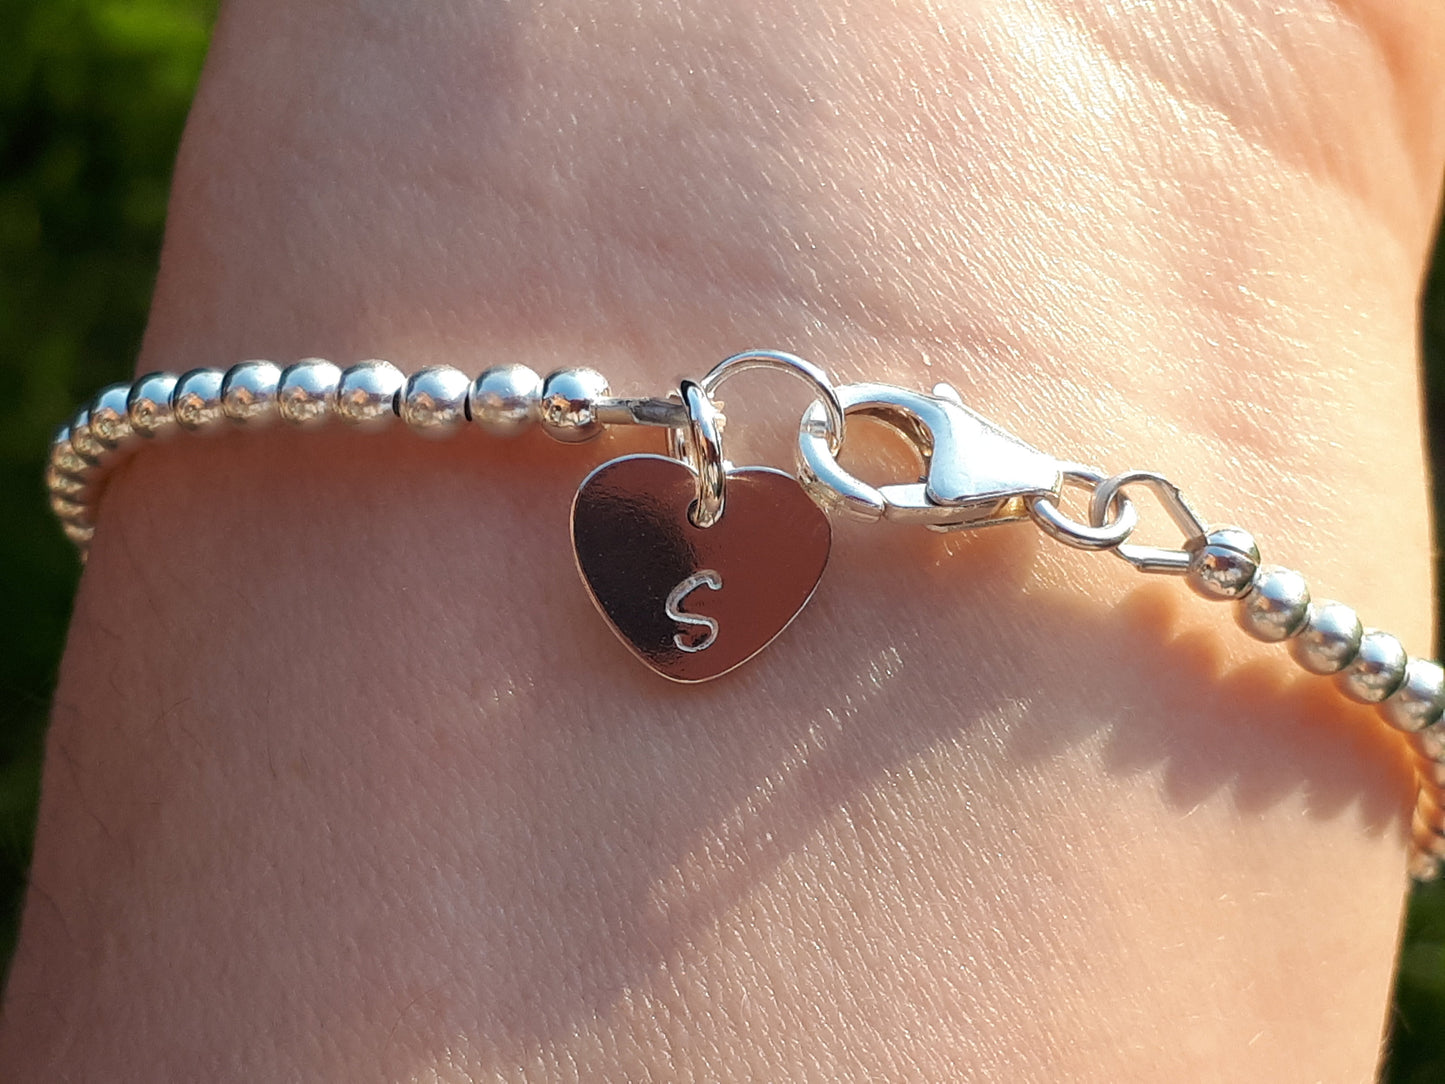 Ruby bracelet sterling silver with optional personalised initial tag. July birthstone bracelet.